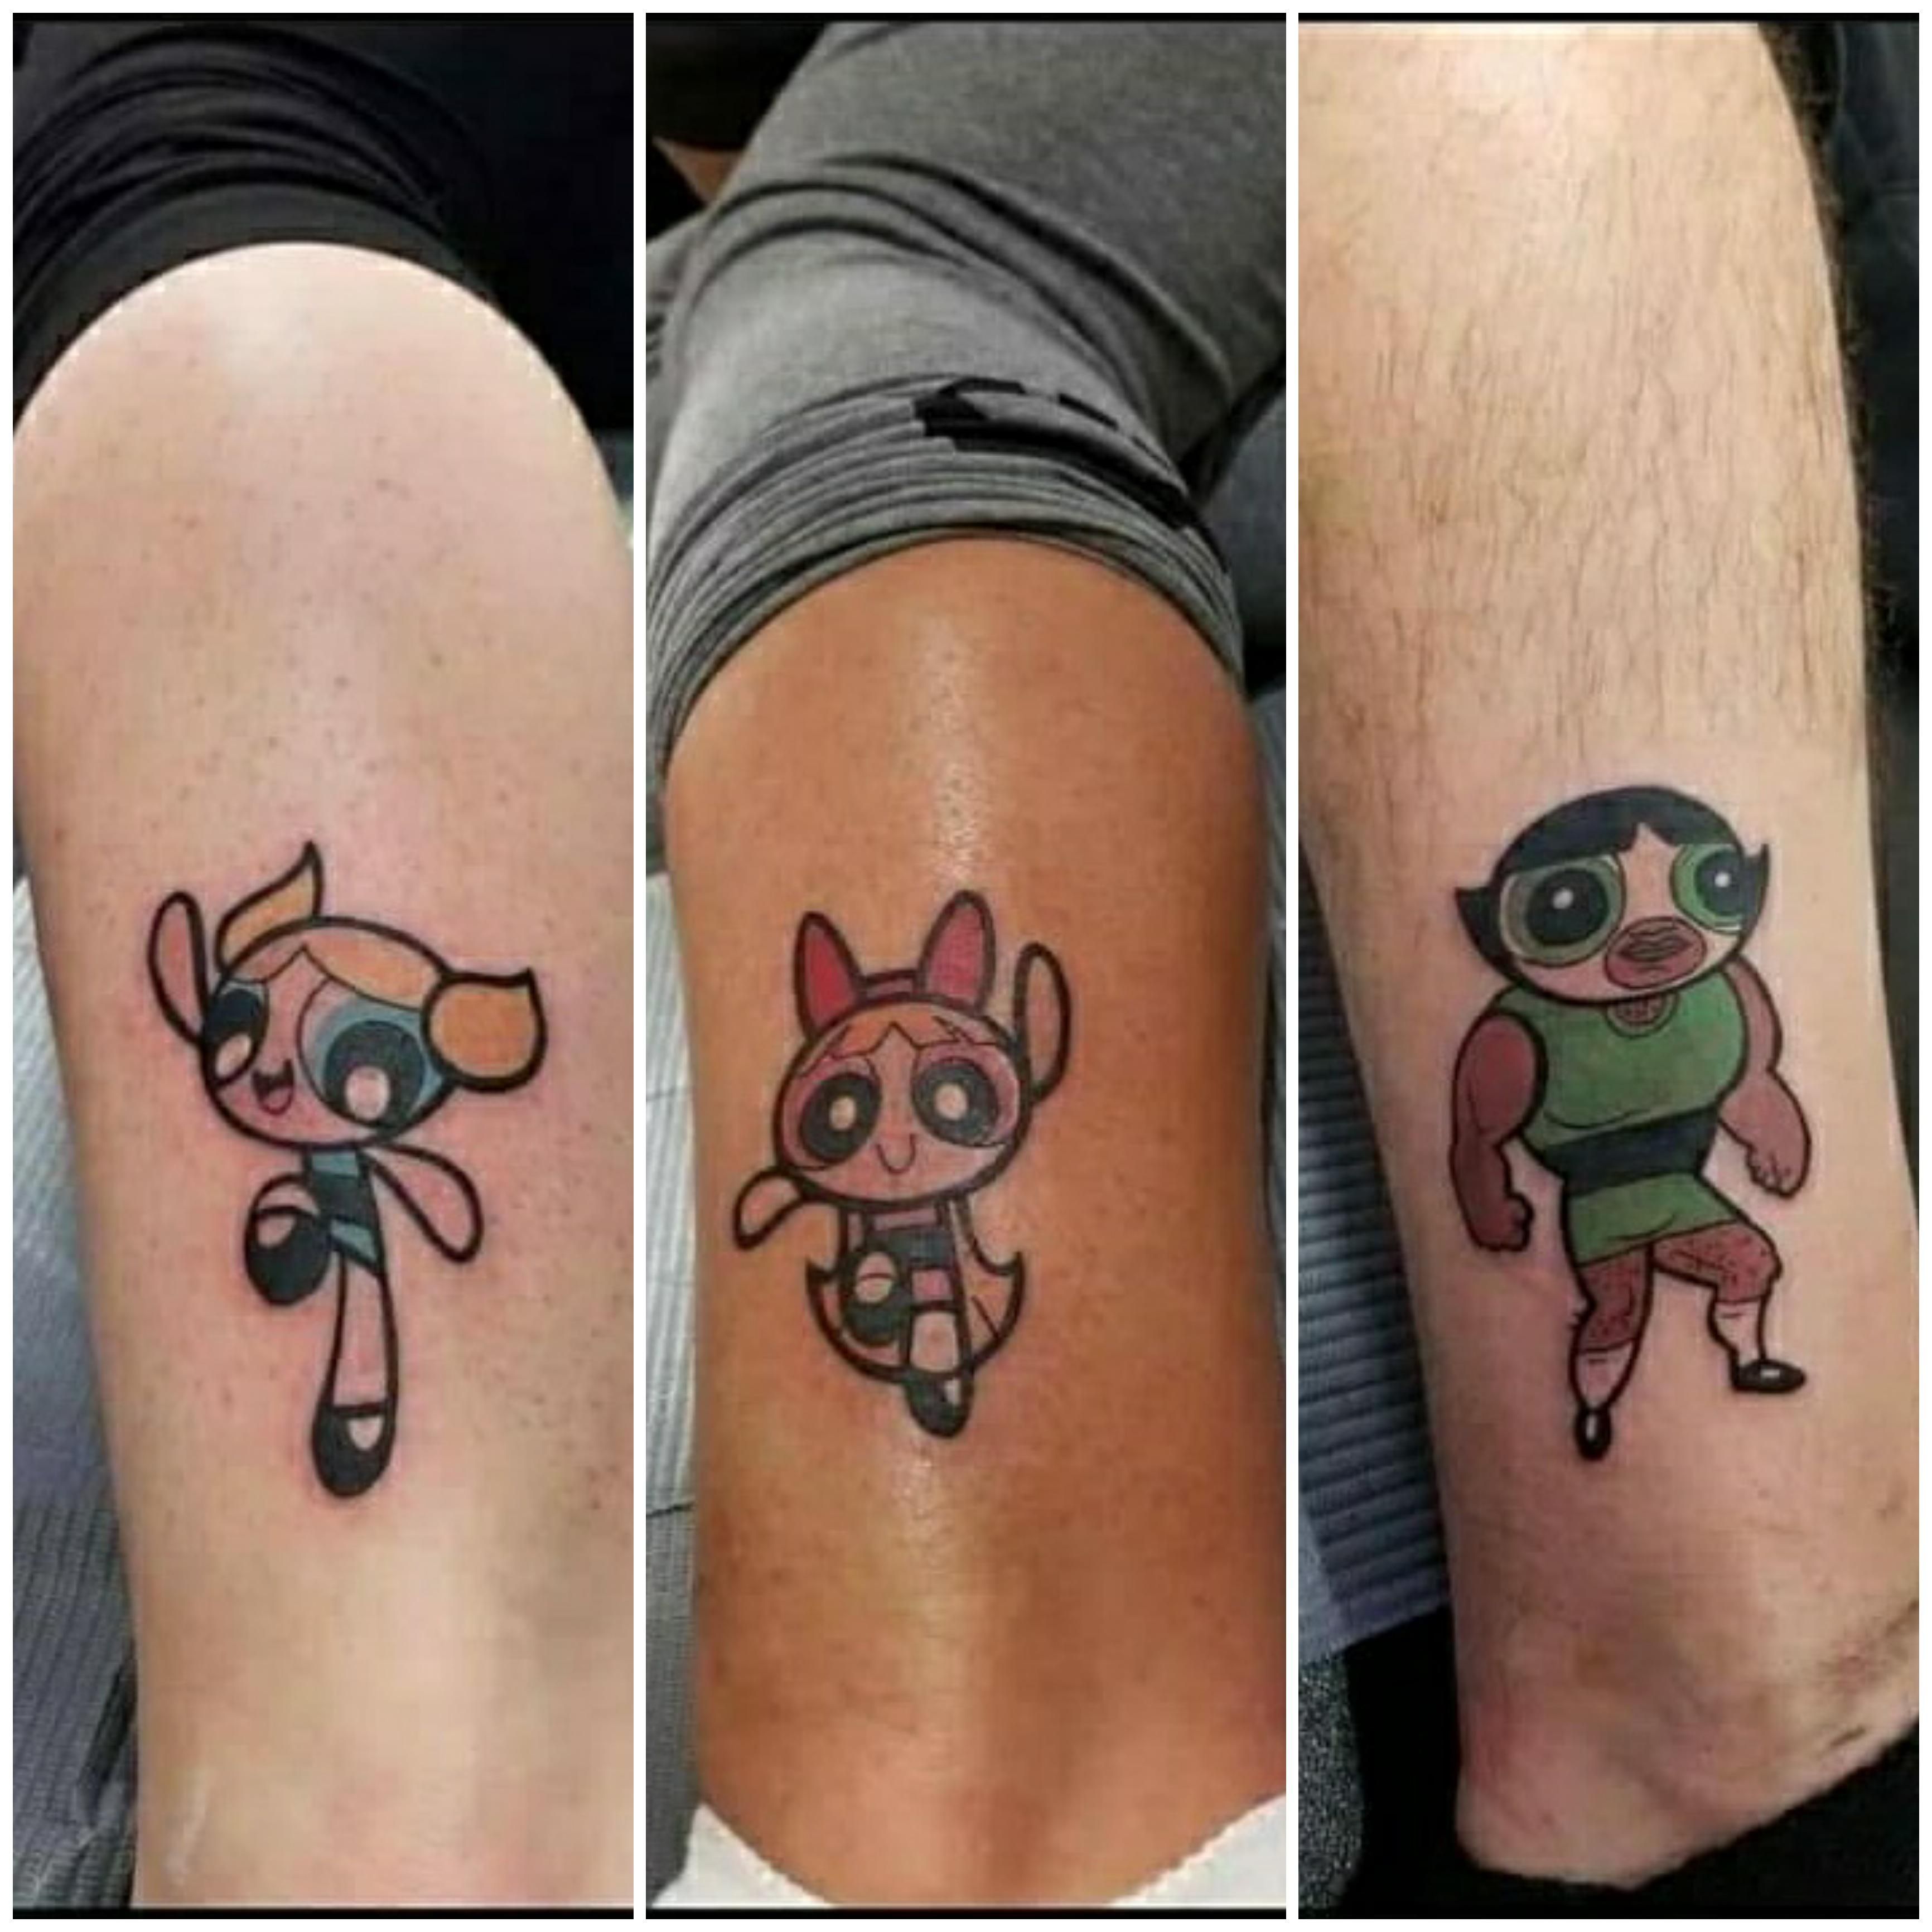 Two sisters and a brother got matching tattoos, that's a real brother right here